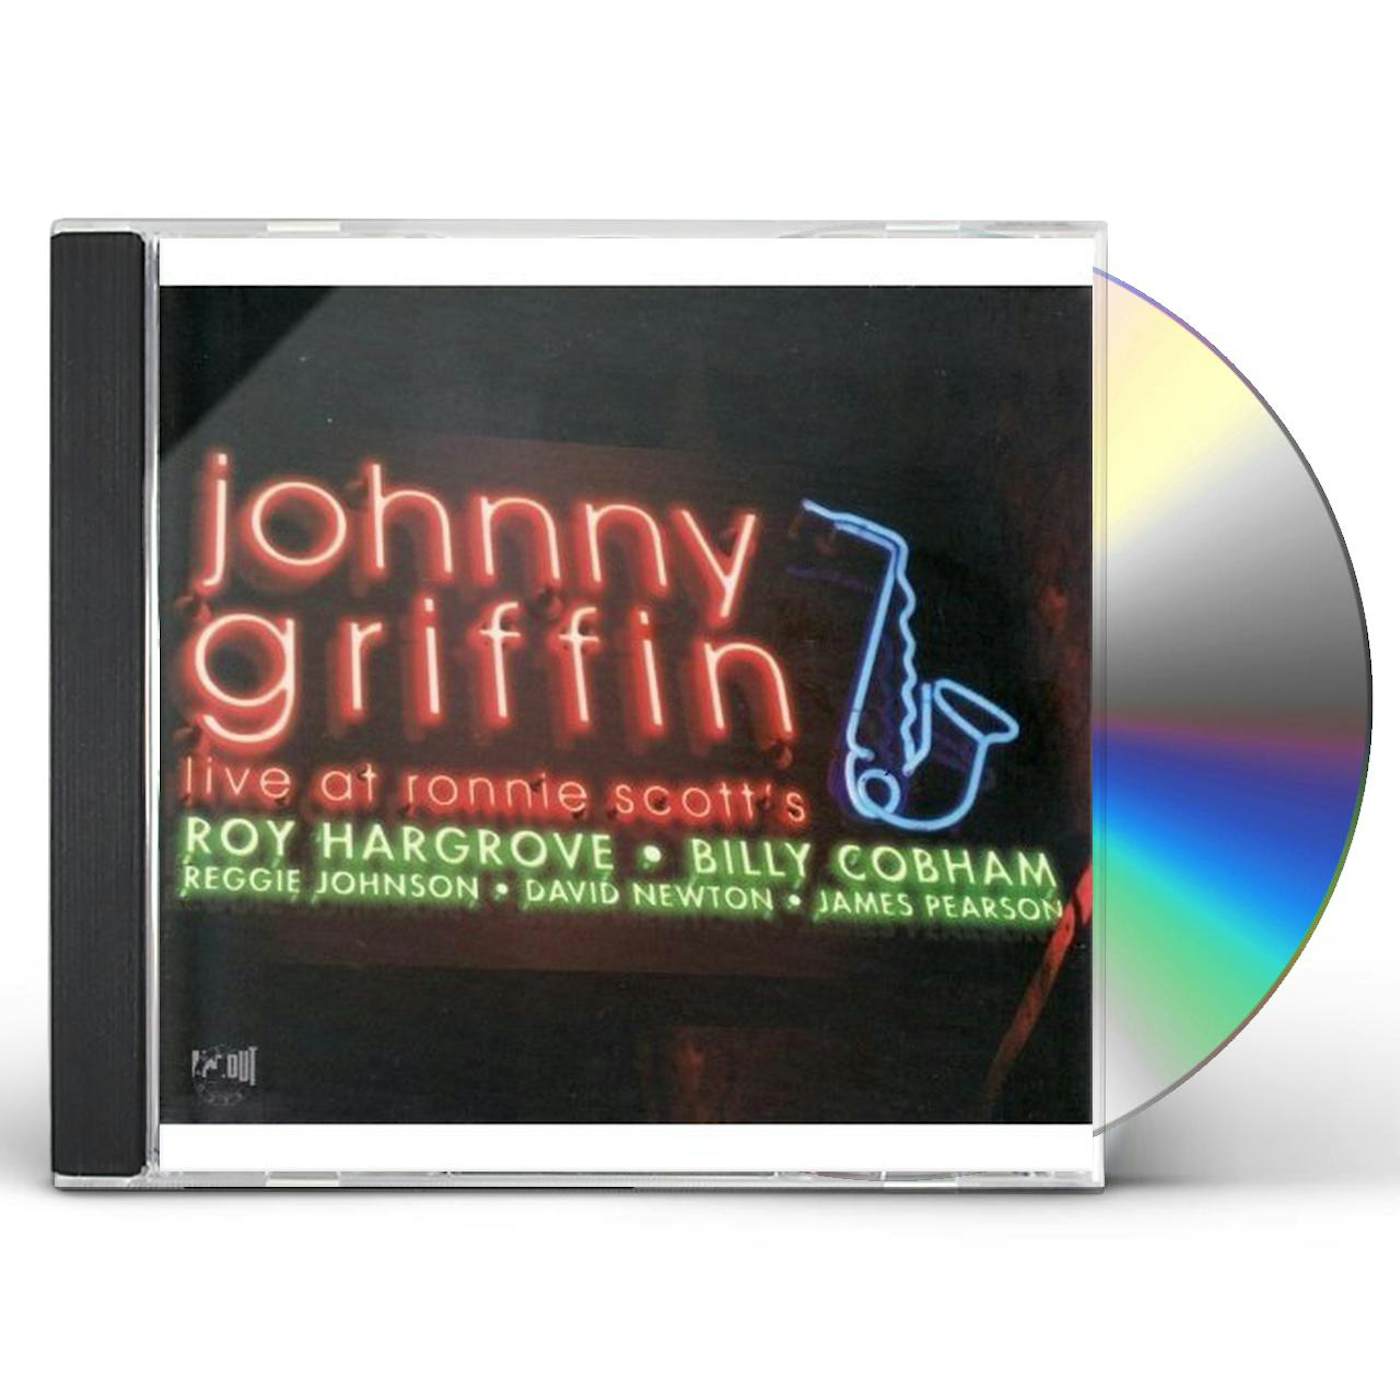 Johnny Griffin LIVE AT RONNIES SCOTT'S CD